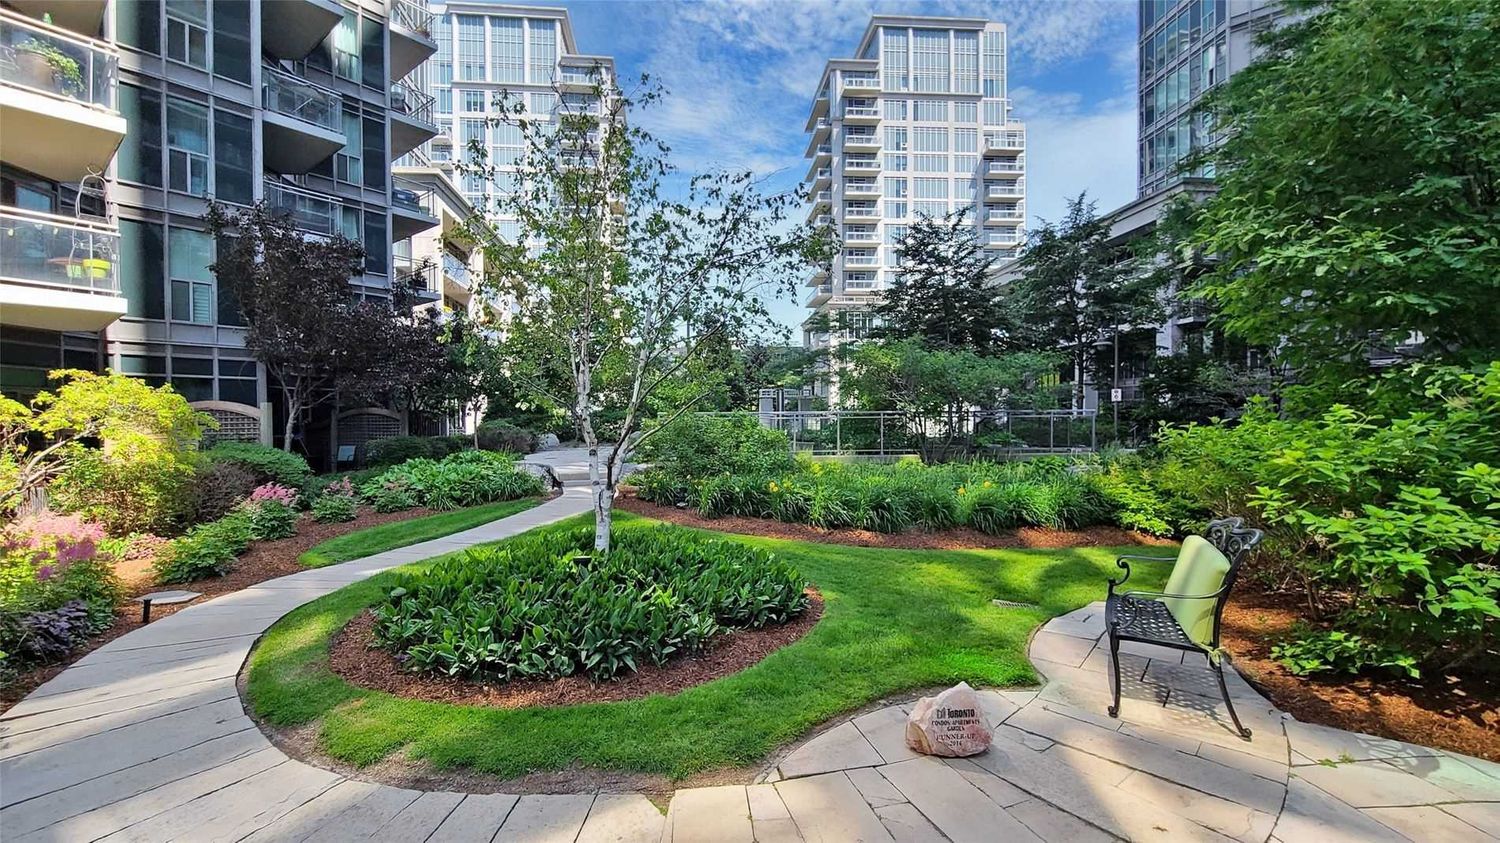 2121 Lake Shore Boulevard W. Voyager I at Waterview Condos is located in  Etobicoke, Toronto - image #13 of 13